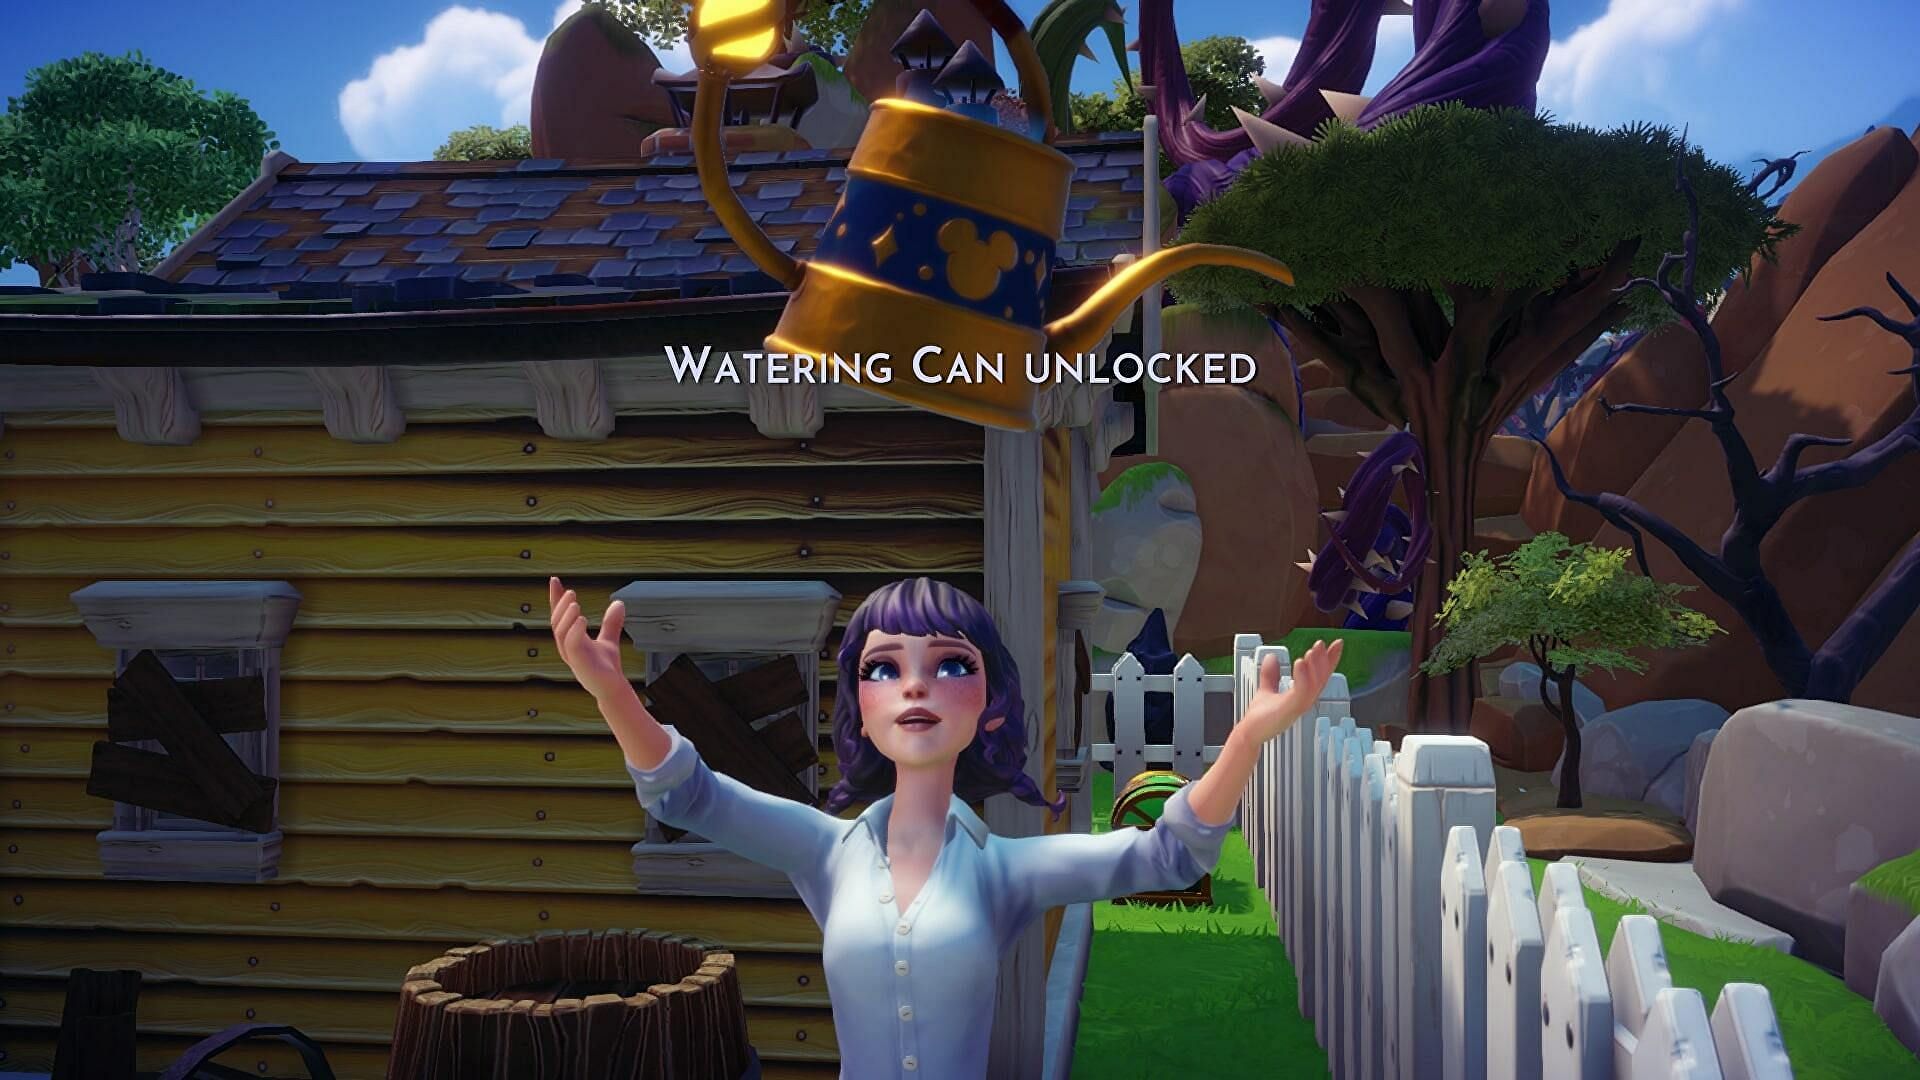 The Watering Can (Image via Gameloft)